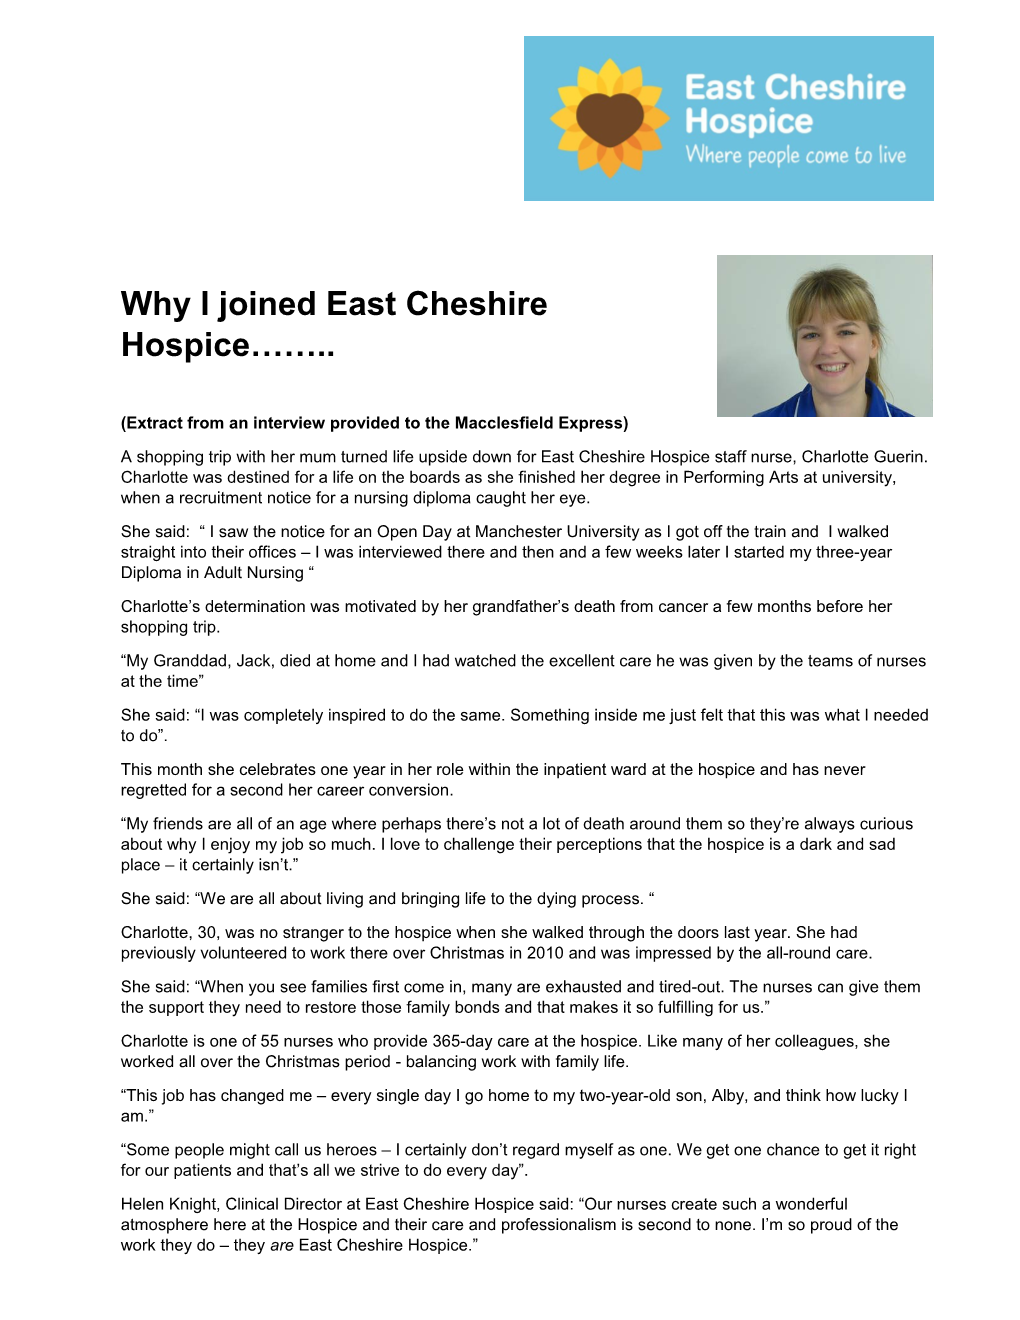 Why I Joined East Cheshire Hospice